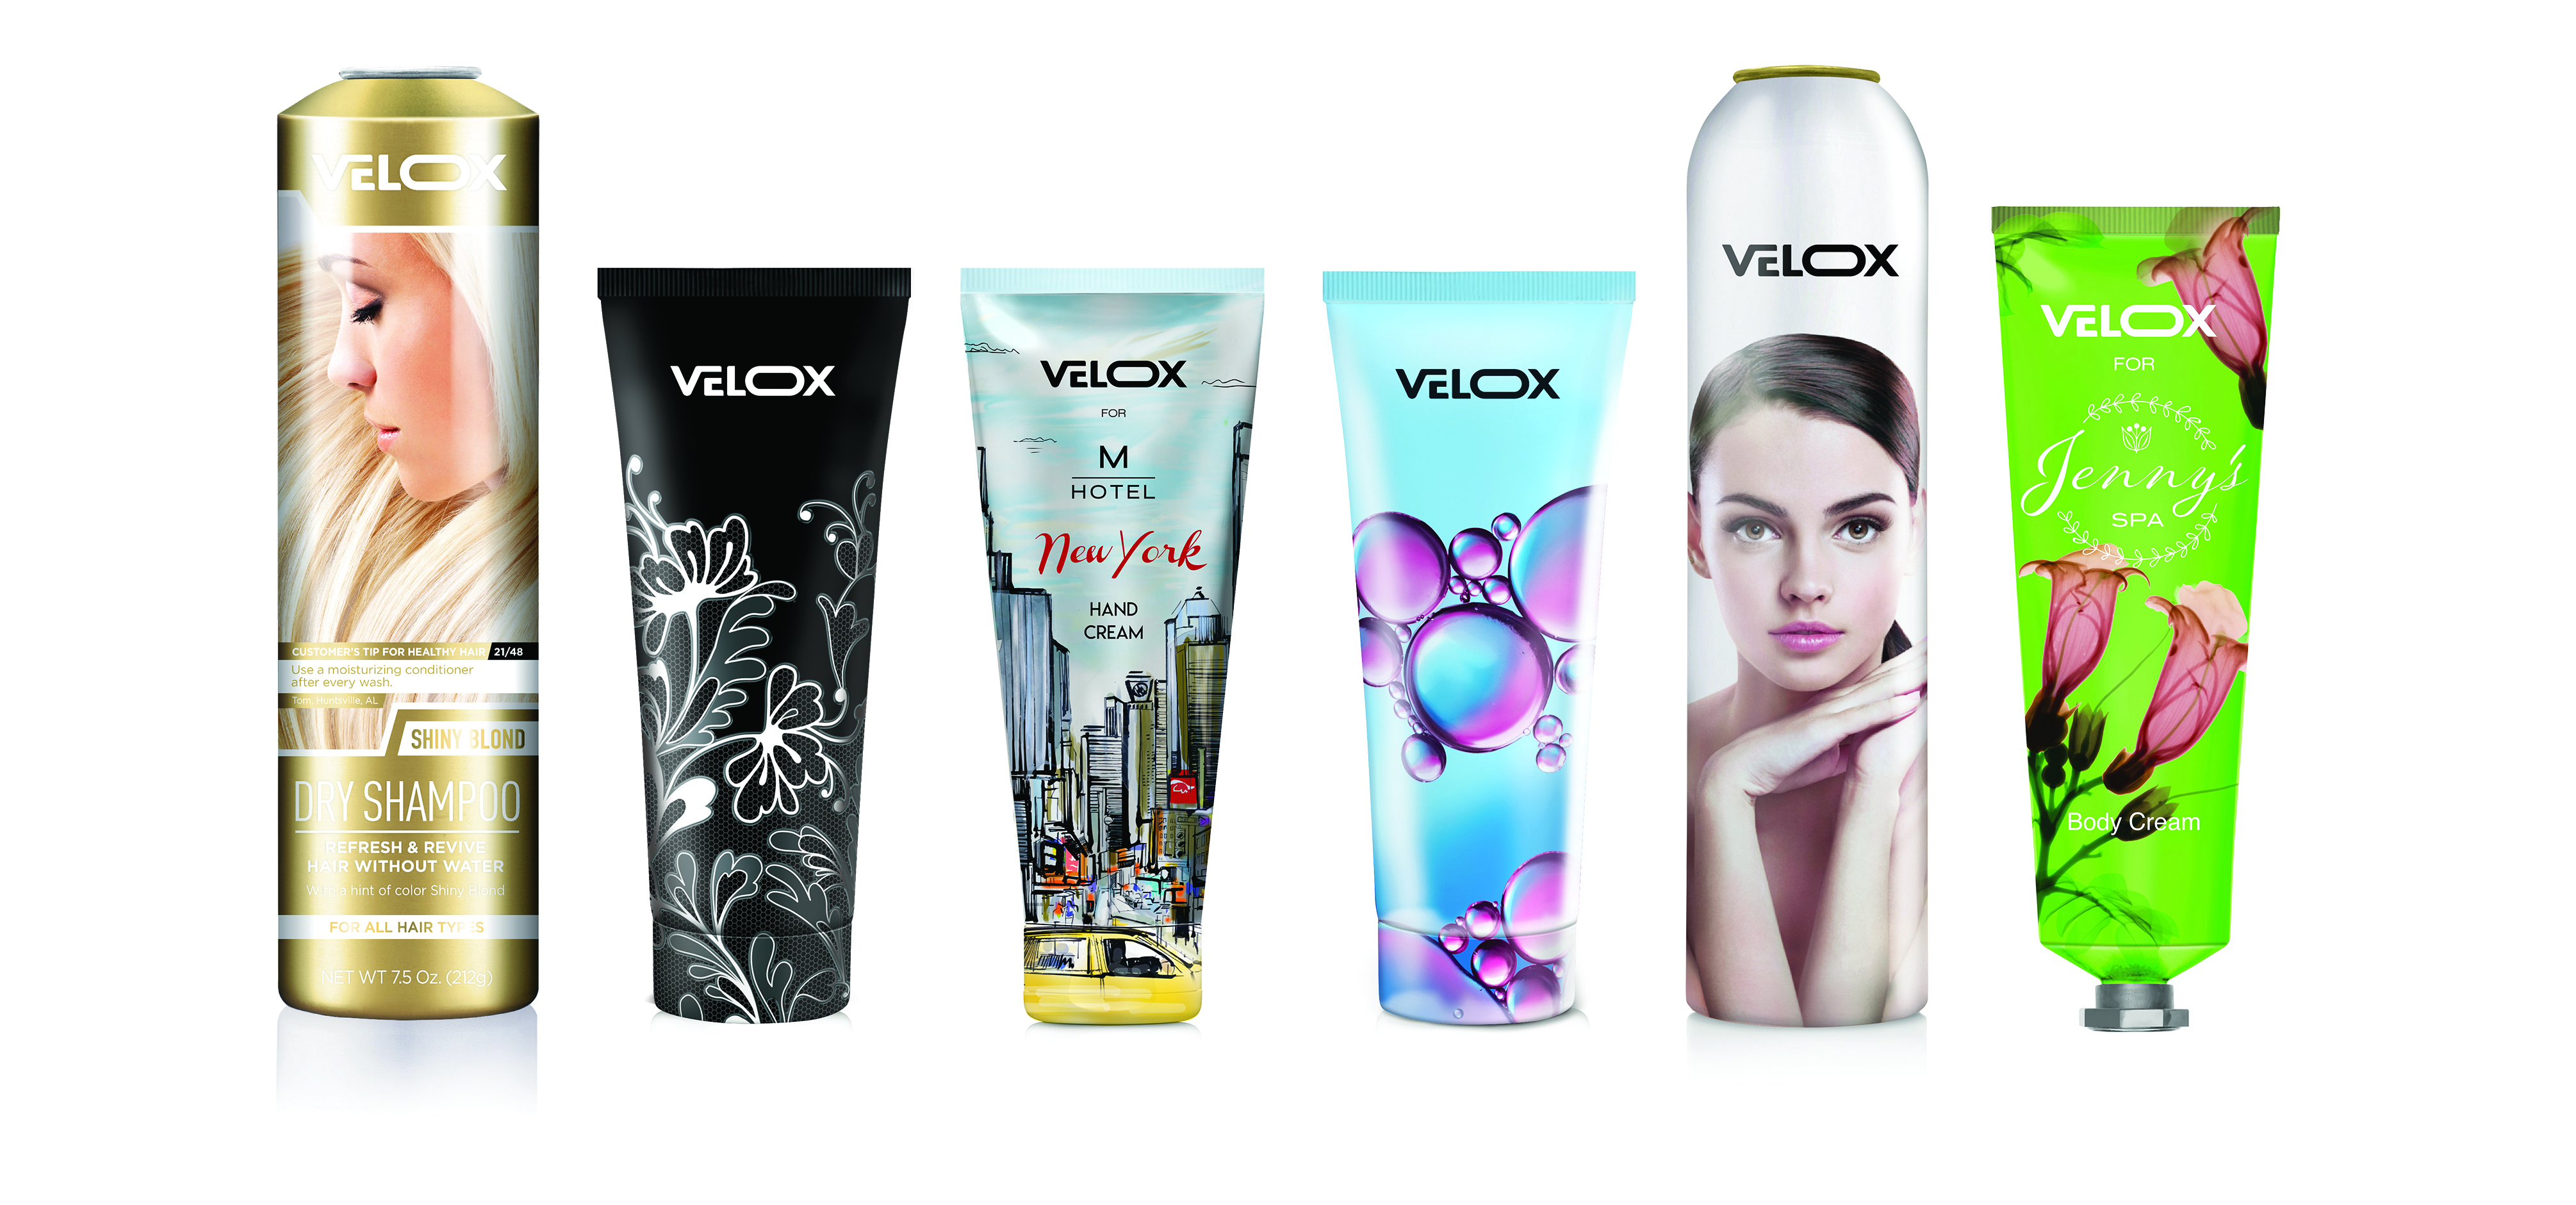 Velox digitally printed containers